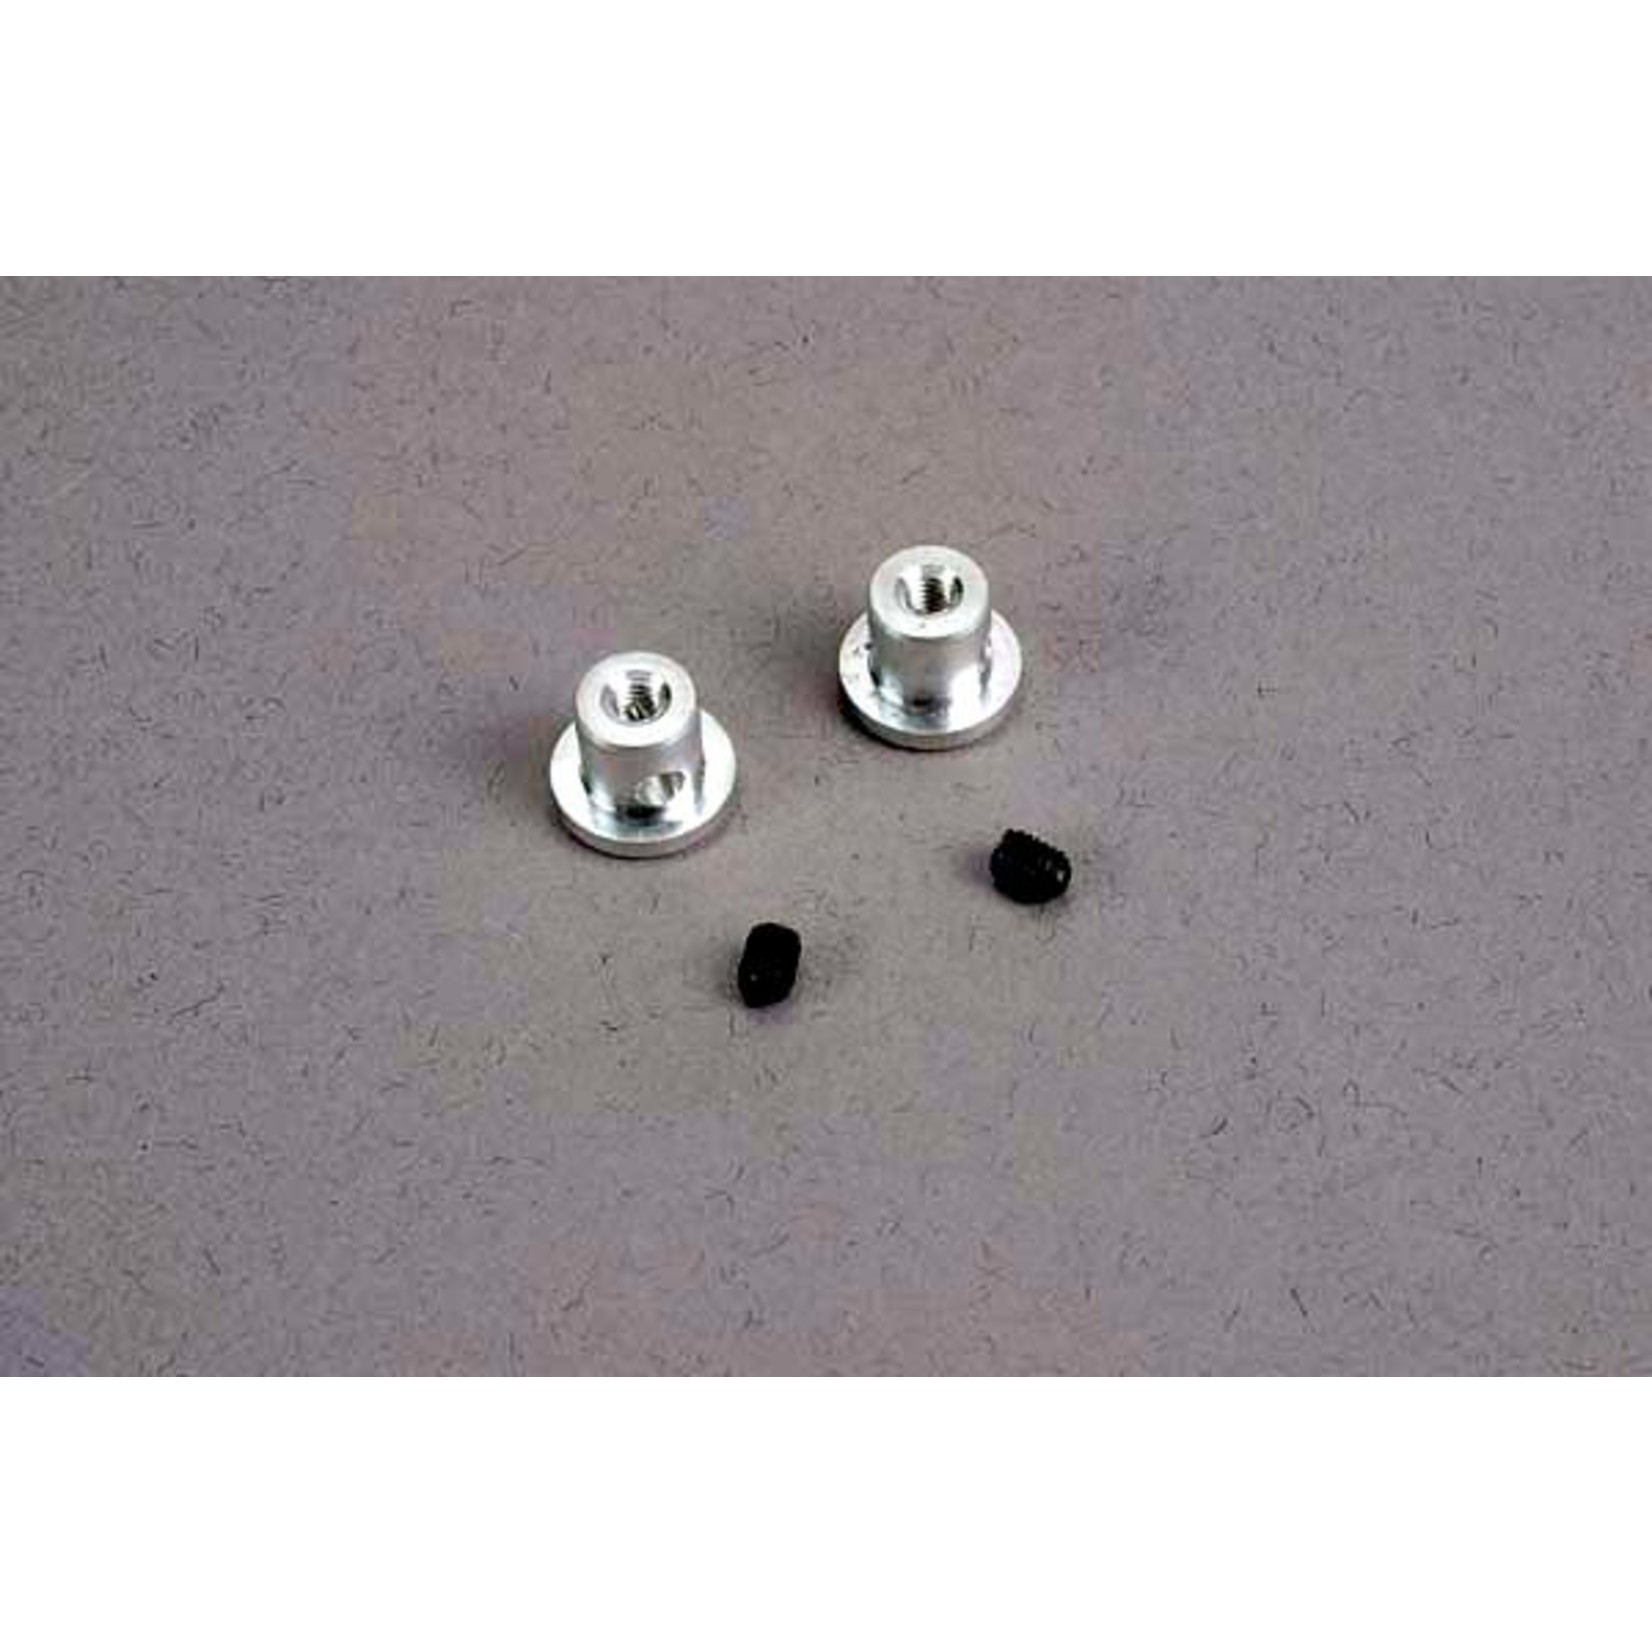 Traxxas 2615 - Wing buttons (2)/ set screws (2)/ spacers (